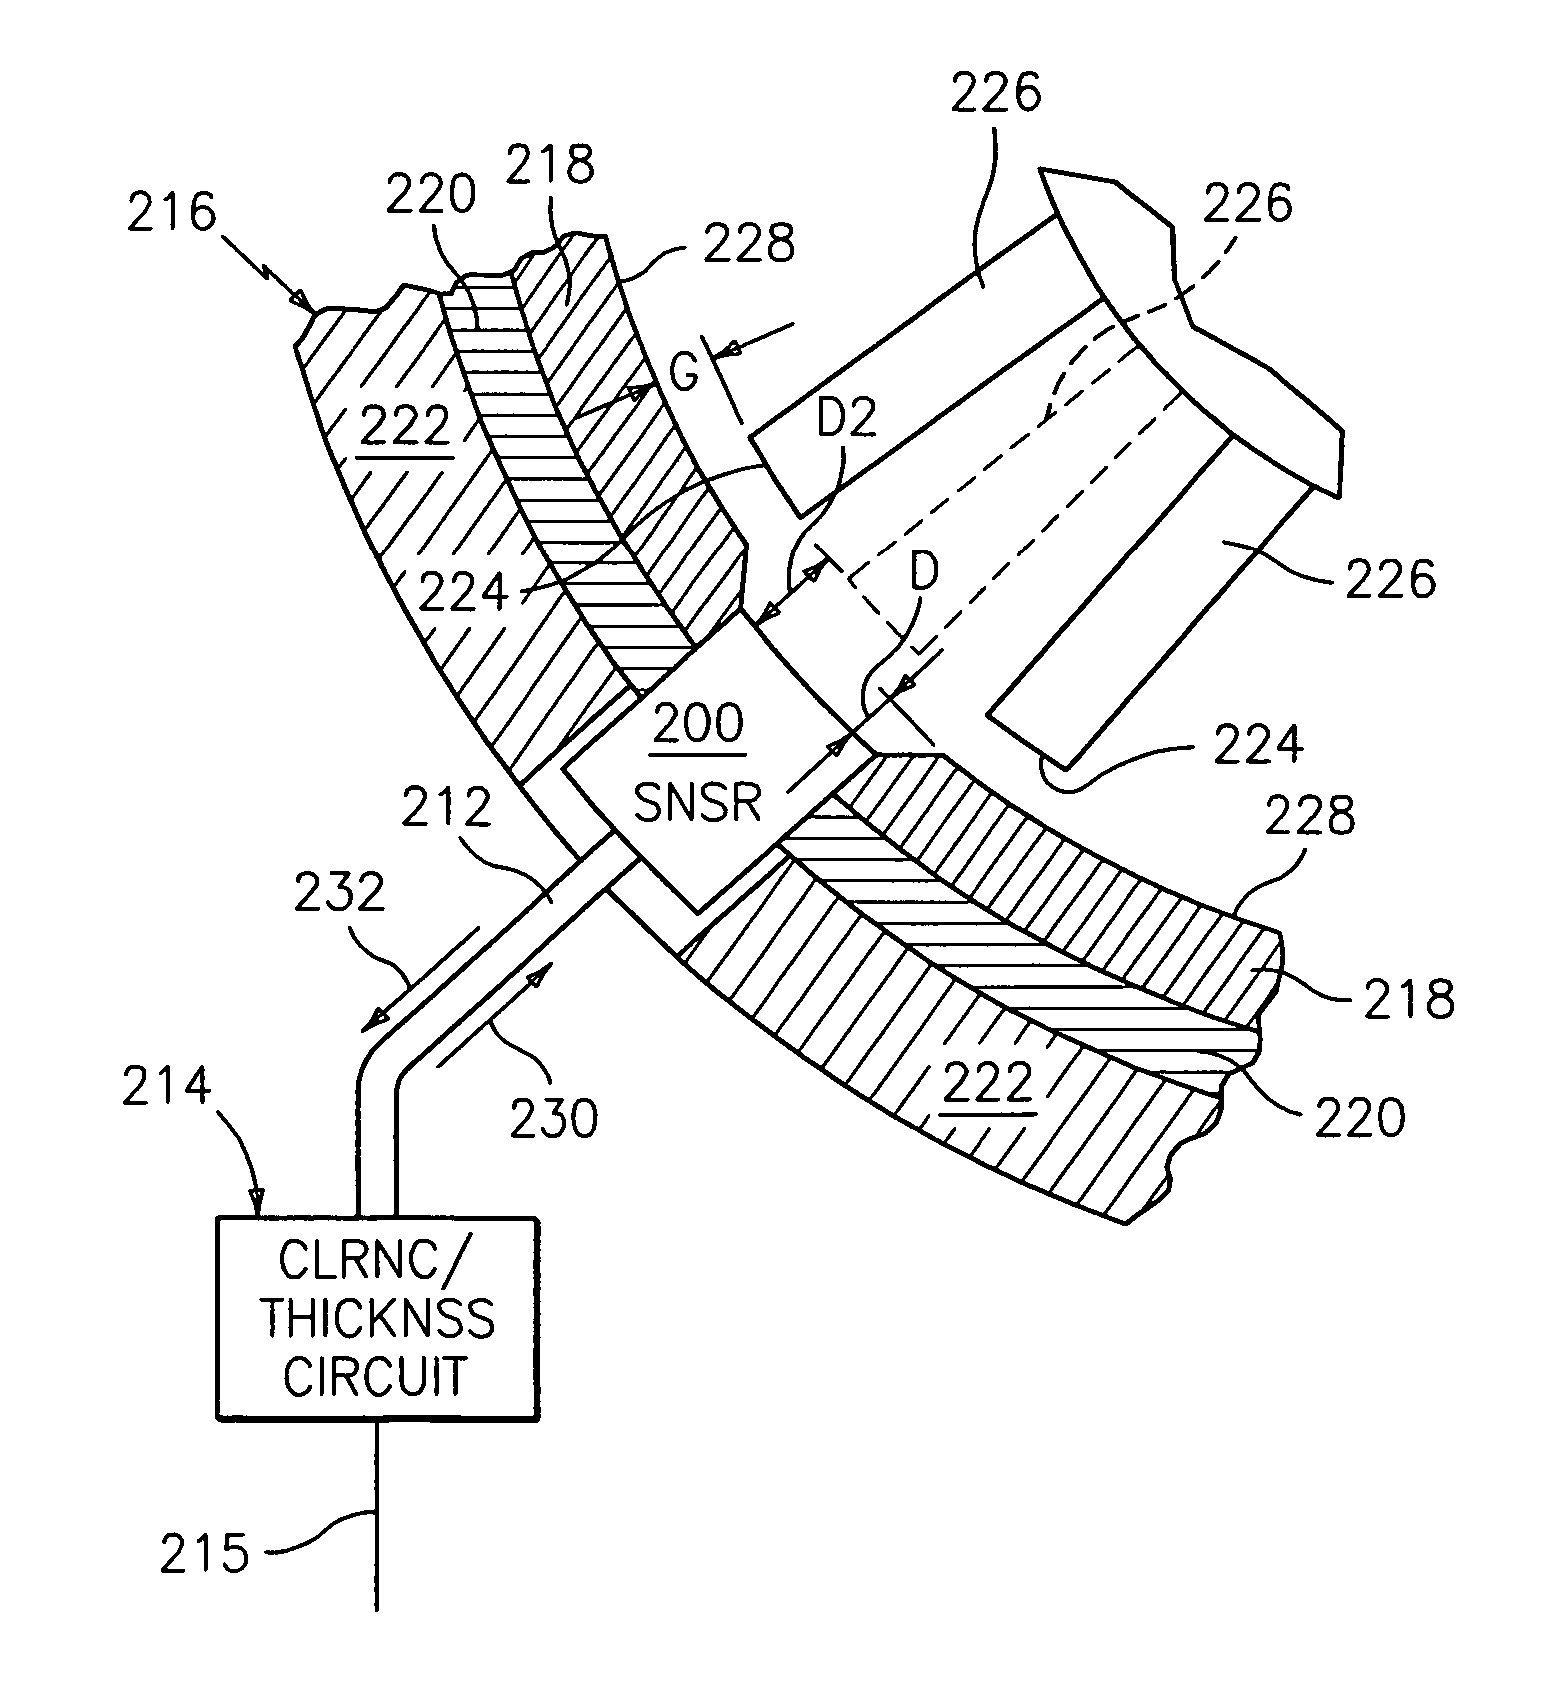 Systems and methods for monitoring thermal growth and controlling clearances, and maintaining health of turbo machinery applications